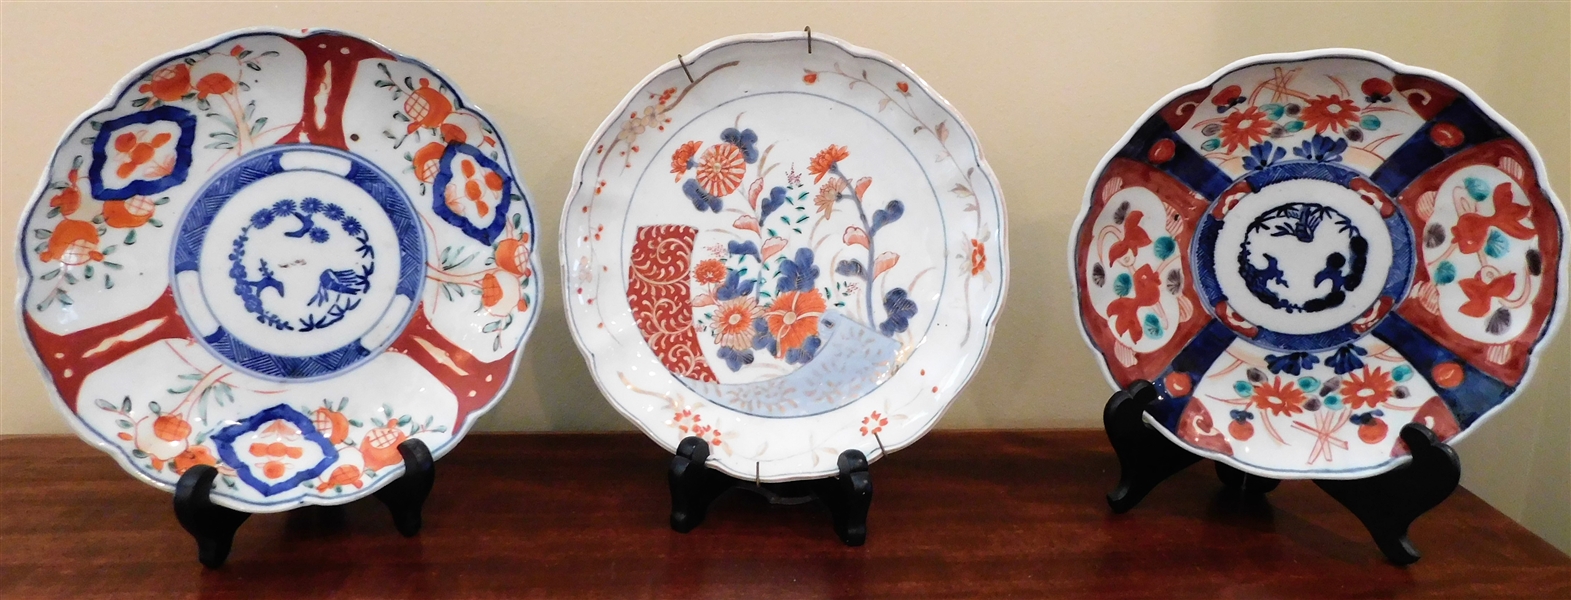 3 Chinese Export Plates -Center Plate Made in Japan ,  Plate with Koi Fish Measures 8 1/2" 